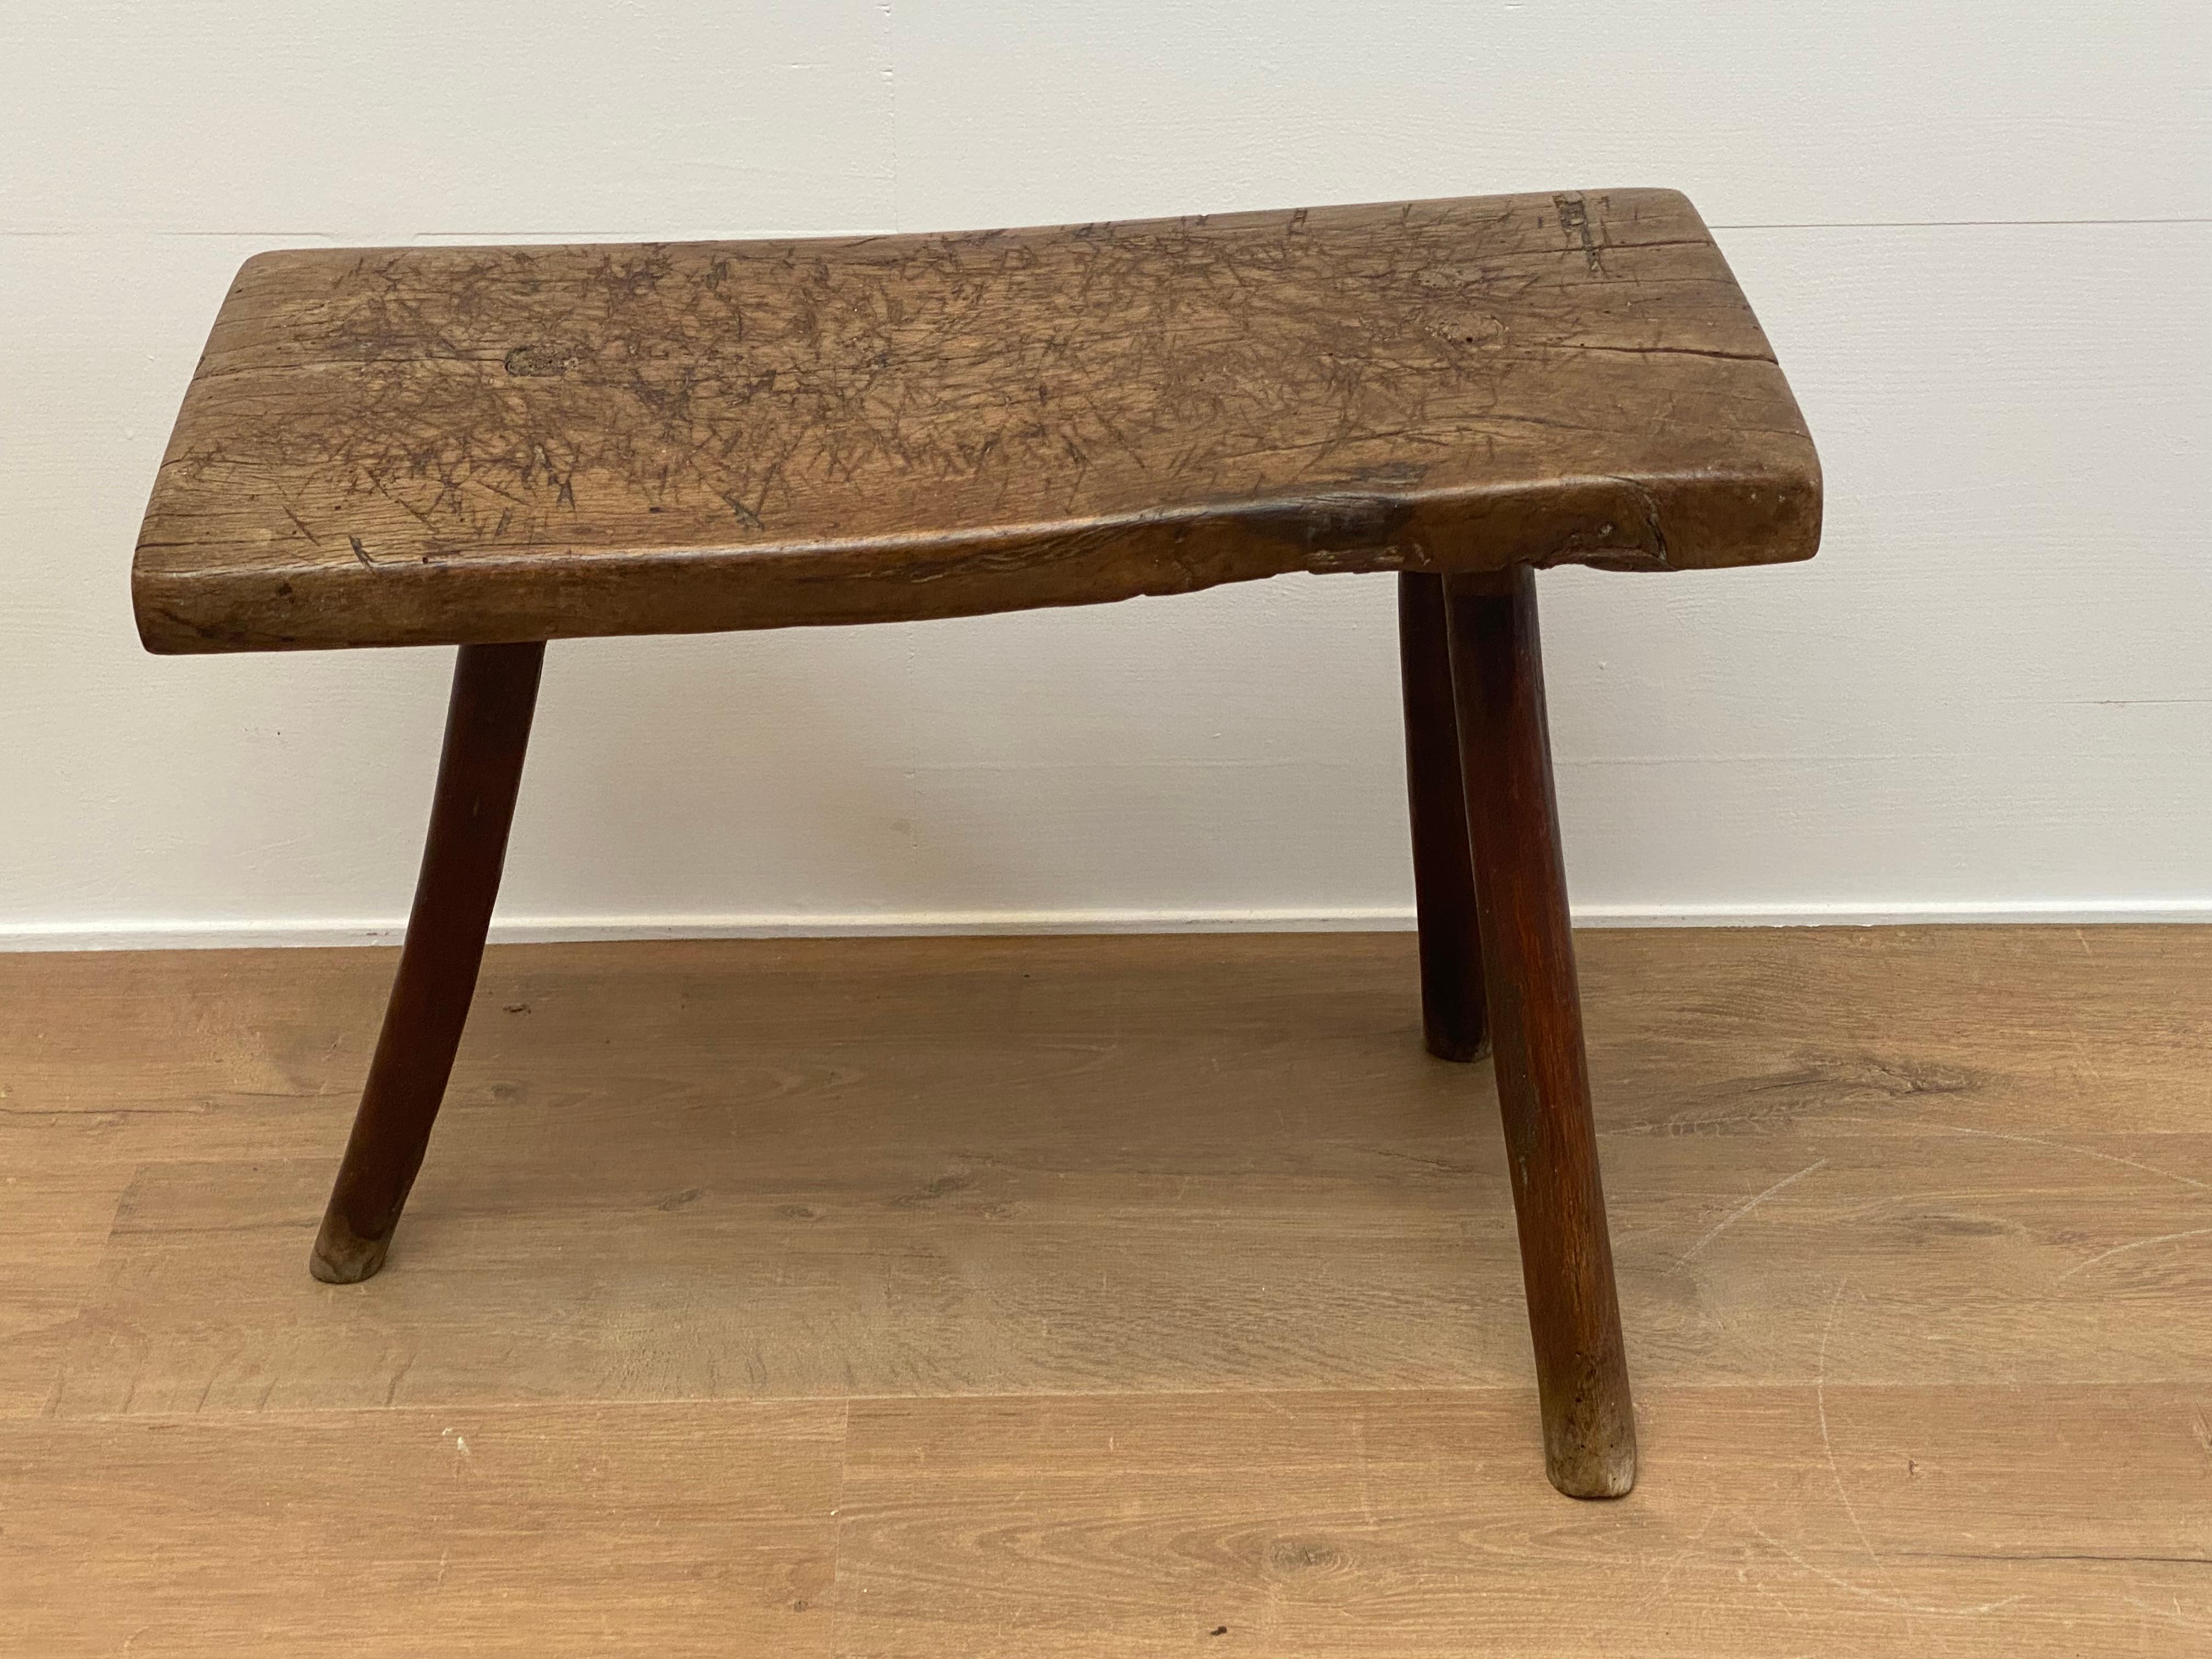 Rustic, Antique stool or Tabouret from Spain,
Catalunia from around 1920,
good old patina of the Chestnut wood, 
old carvings in the wood, the stool was used in the Spanish Kitchens.